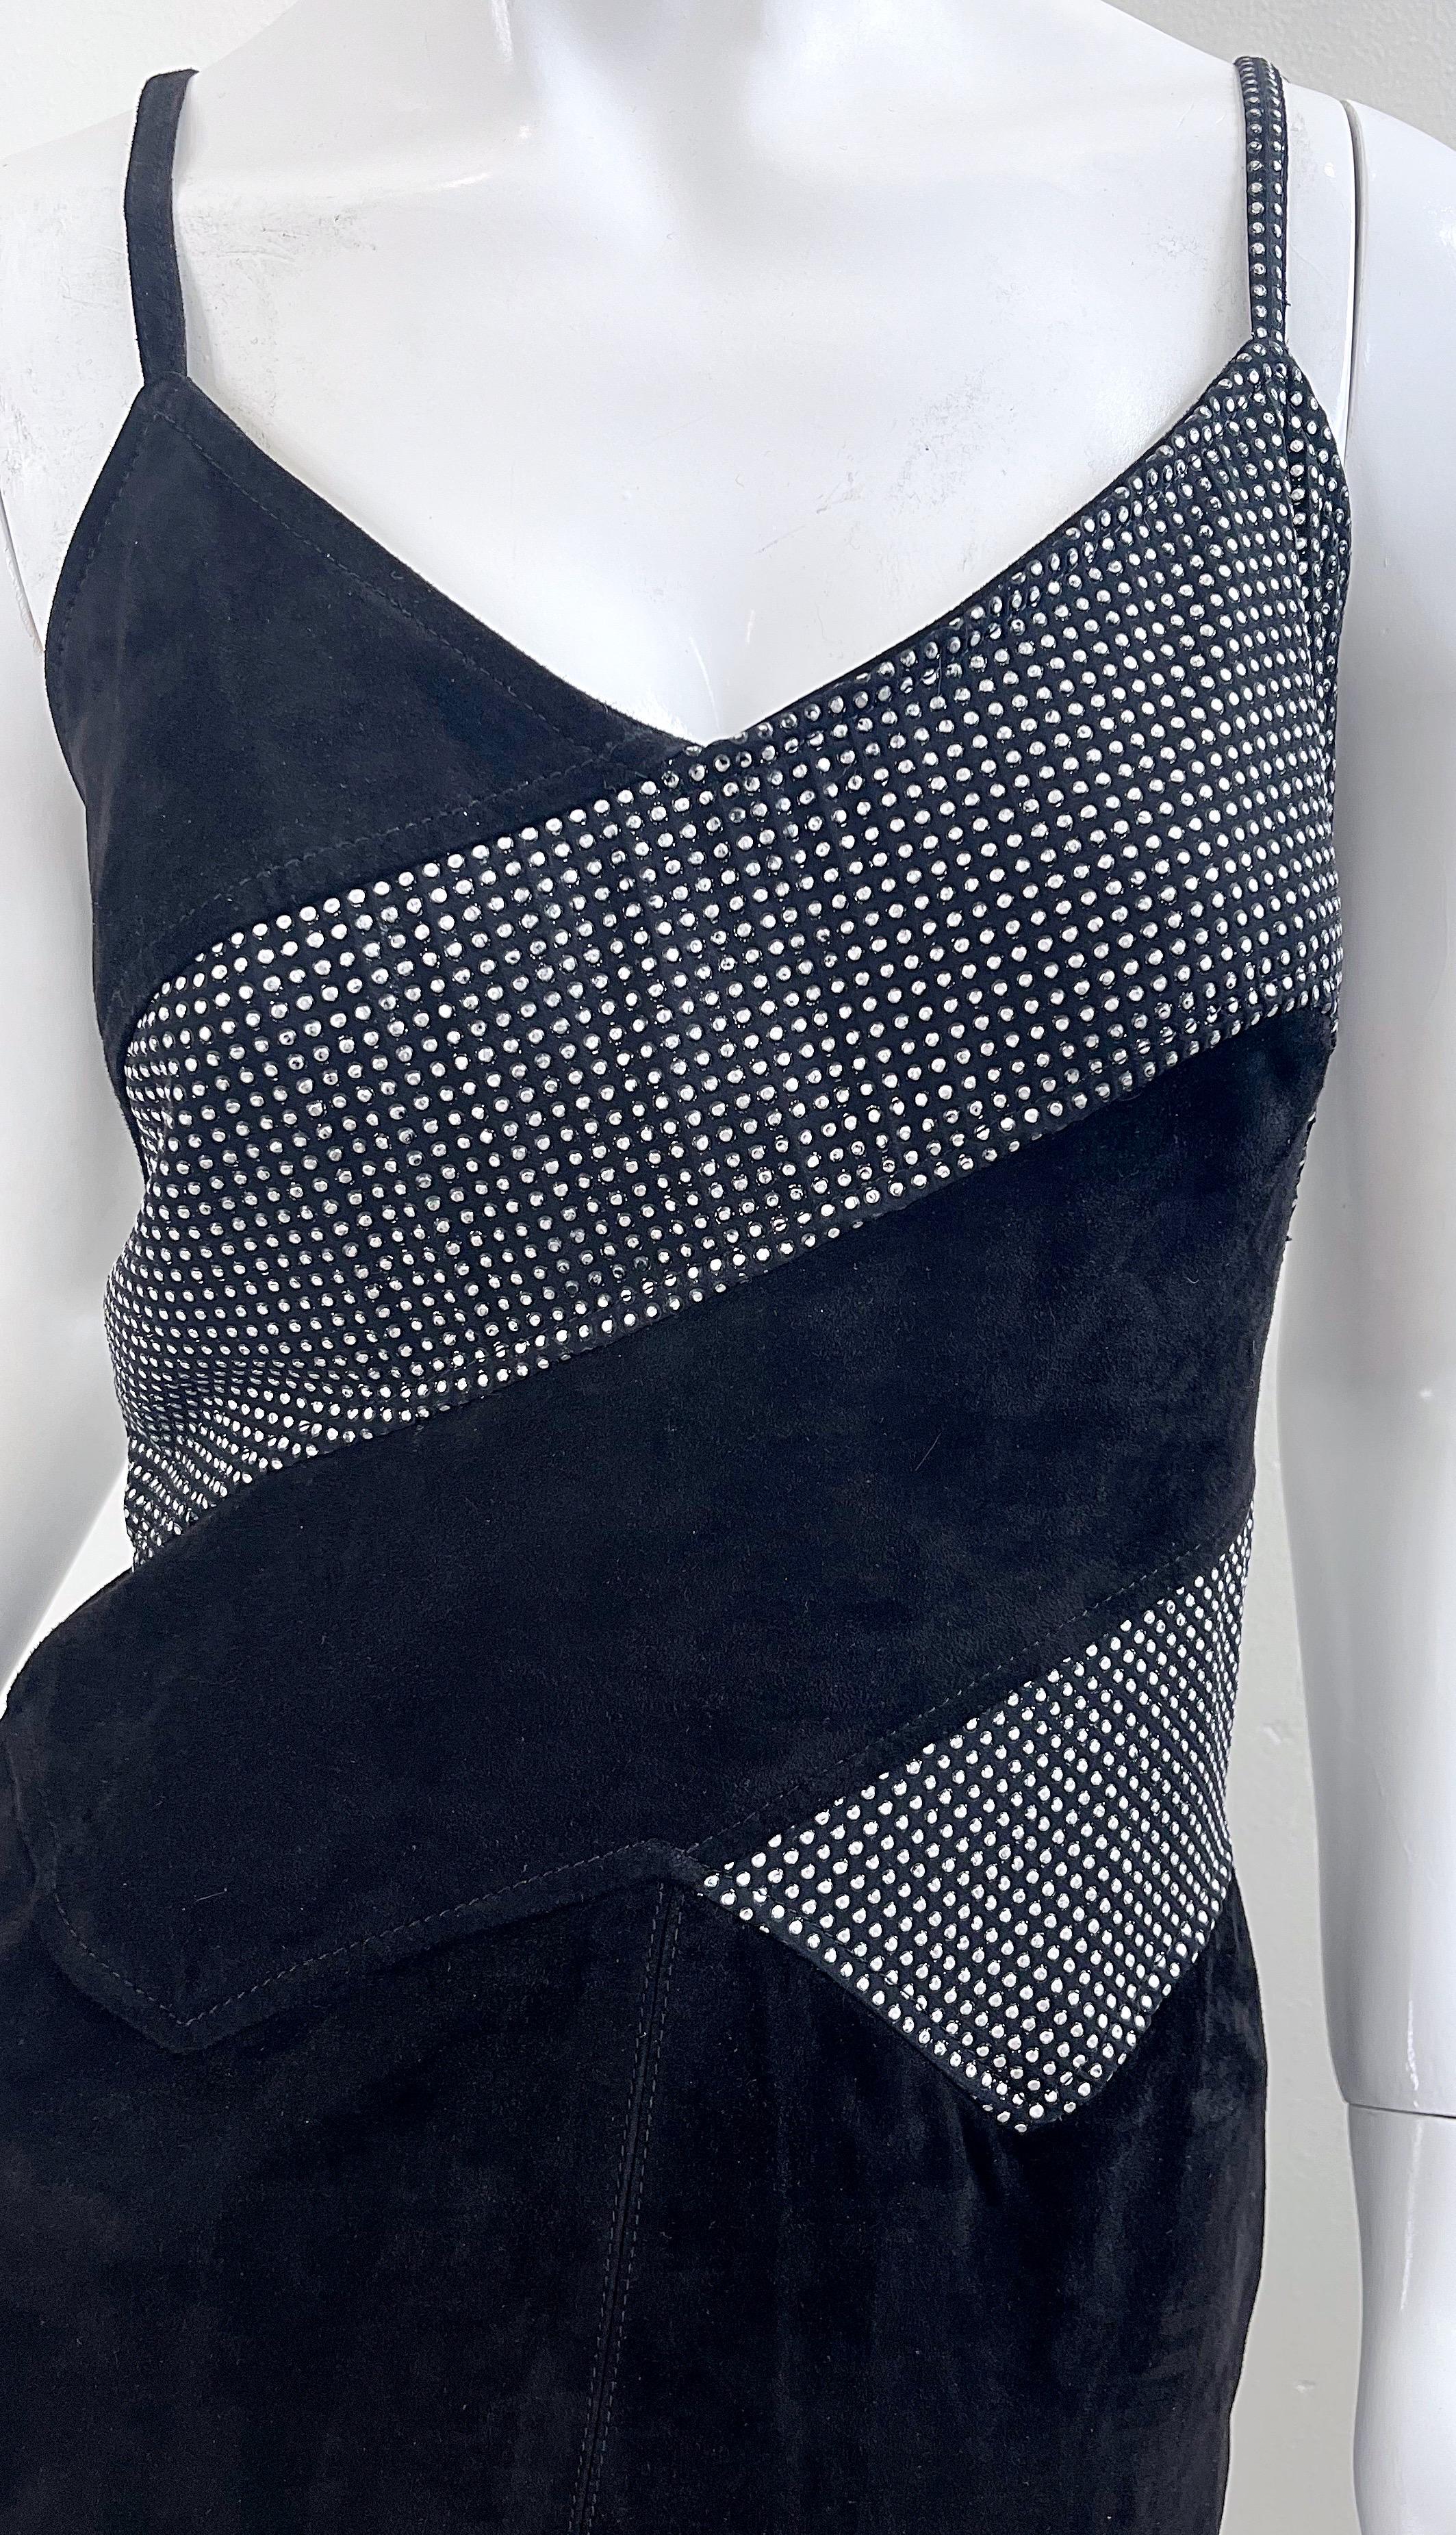 Fendi 1980s Fendissime Black Silver Suede Leather Vintage 80s Hand Painted Dress For Sale 1